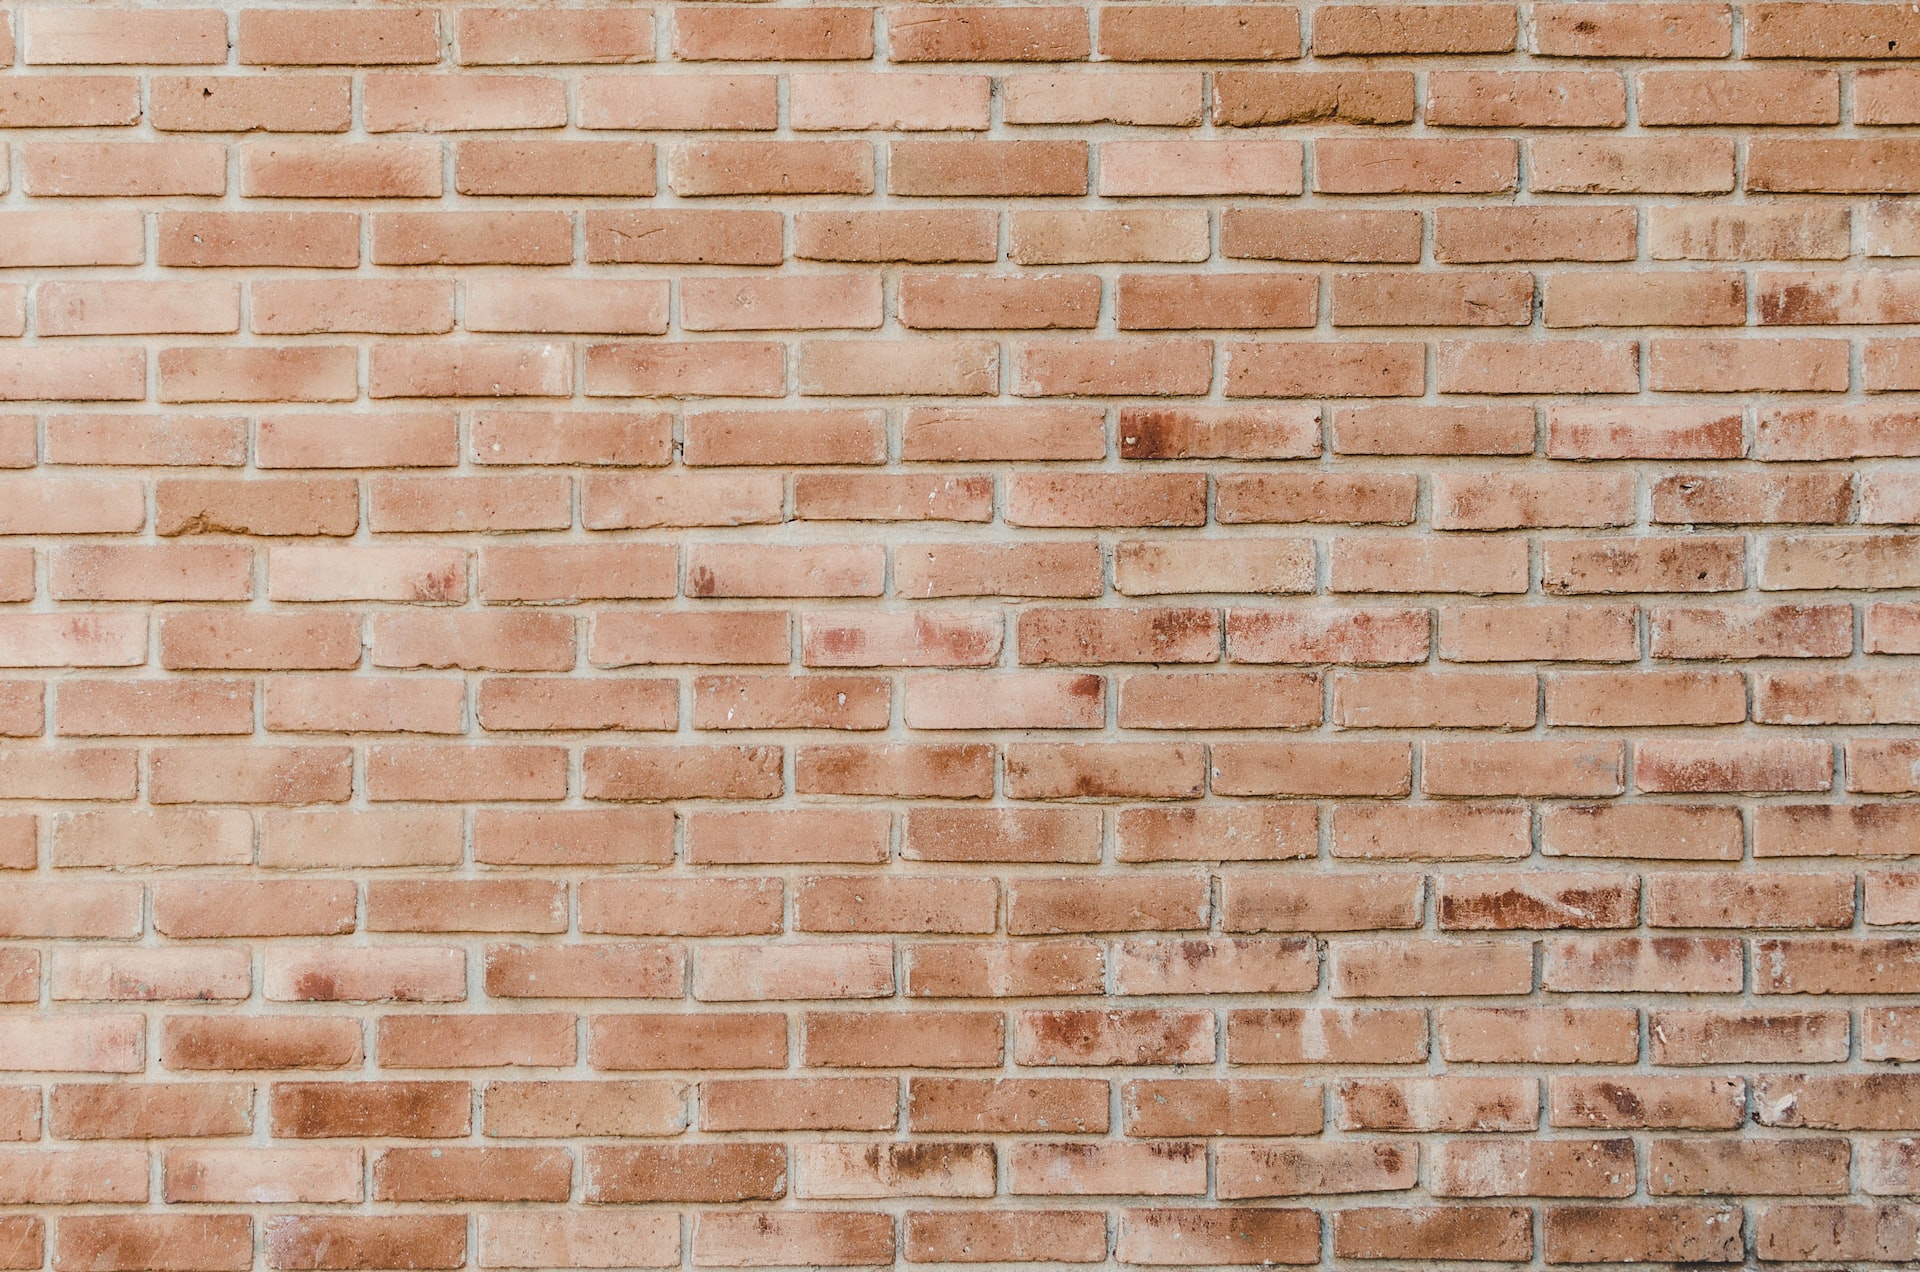 How To Build A Brick Wall In Your Home